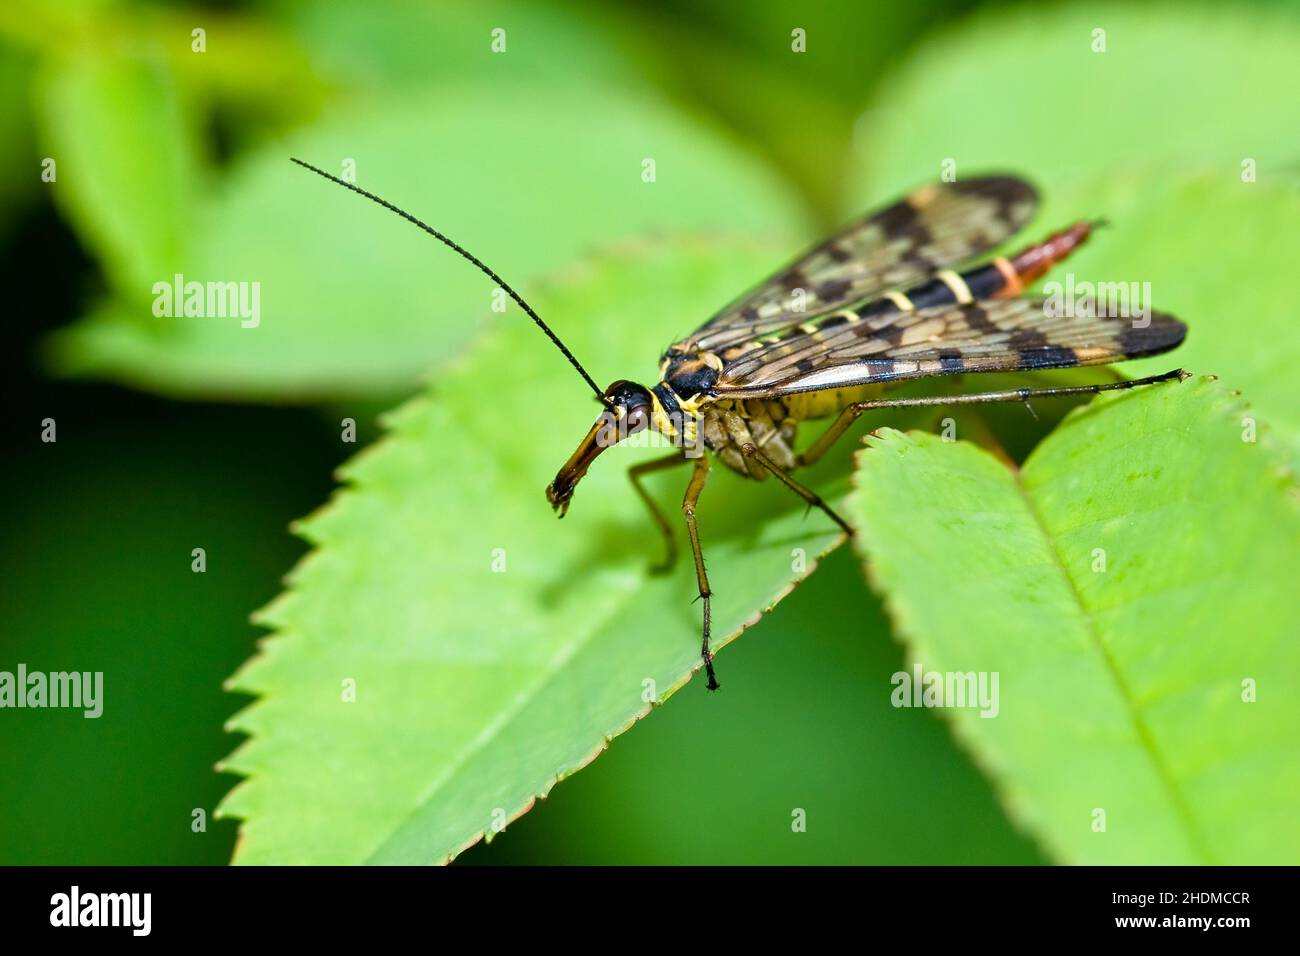 Common scorpionfly perched on green leaves Stock Photo